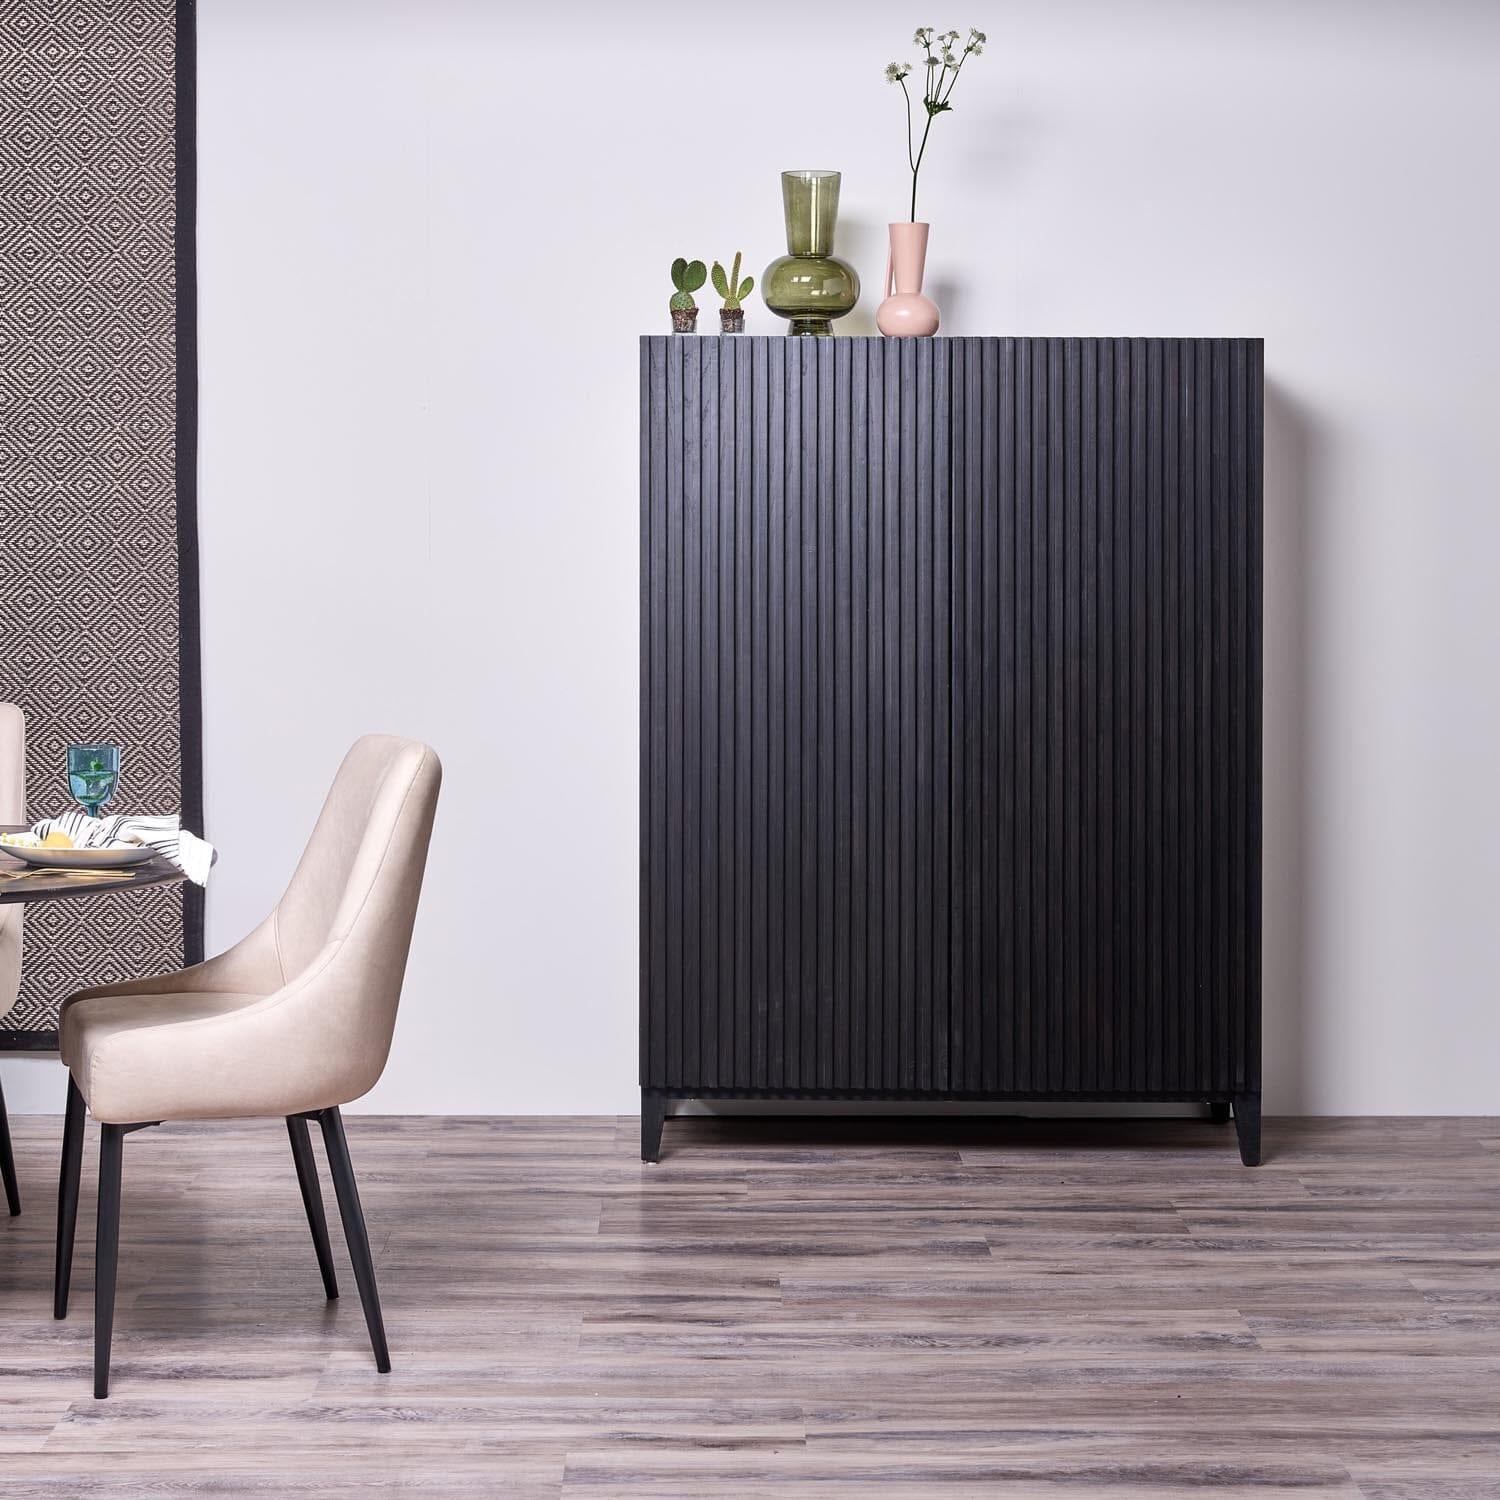 Willow Tall Cabinet Black - Laura James